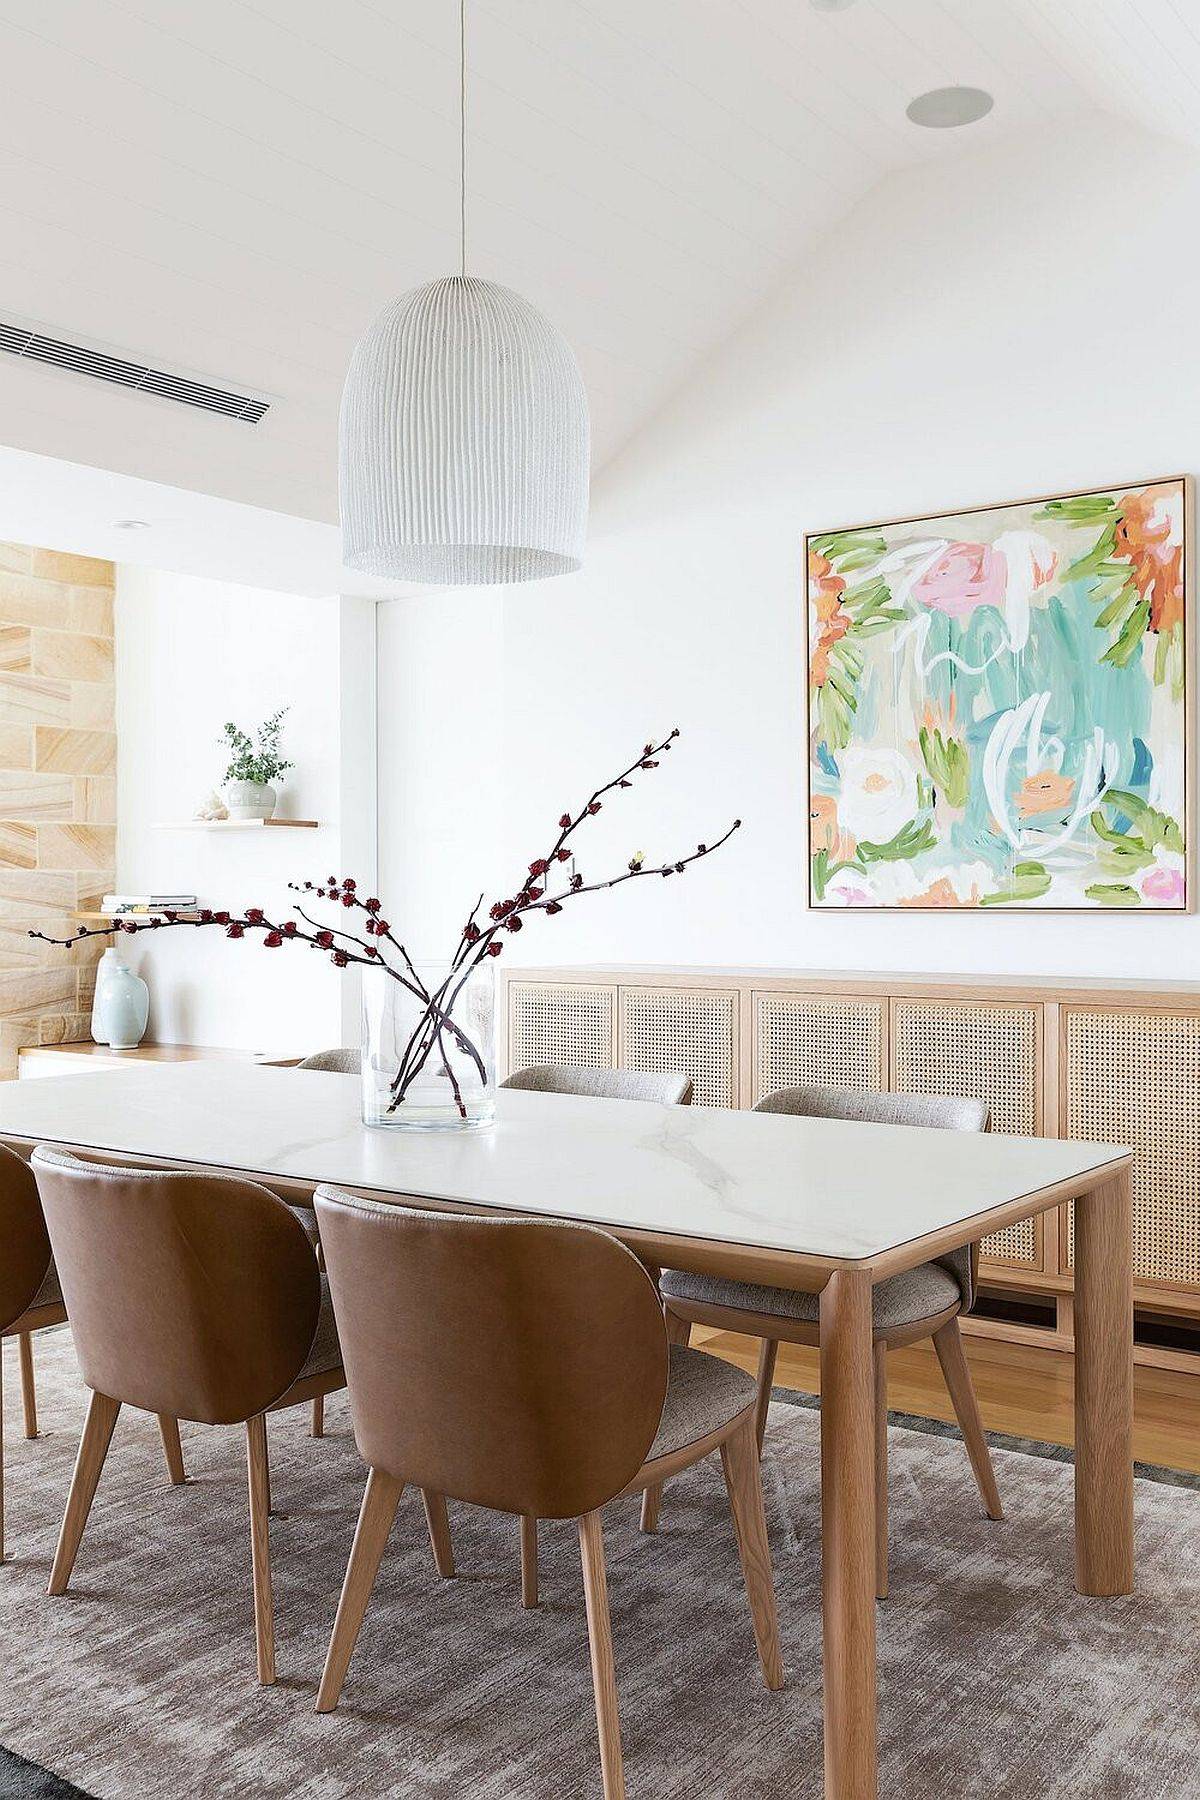 Multi-colored-wall-art-piece-is-perfect-for-the-breezy-beach-style-dining-space-78841